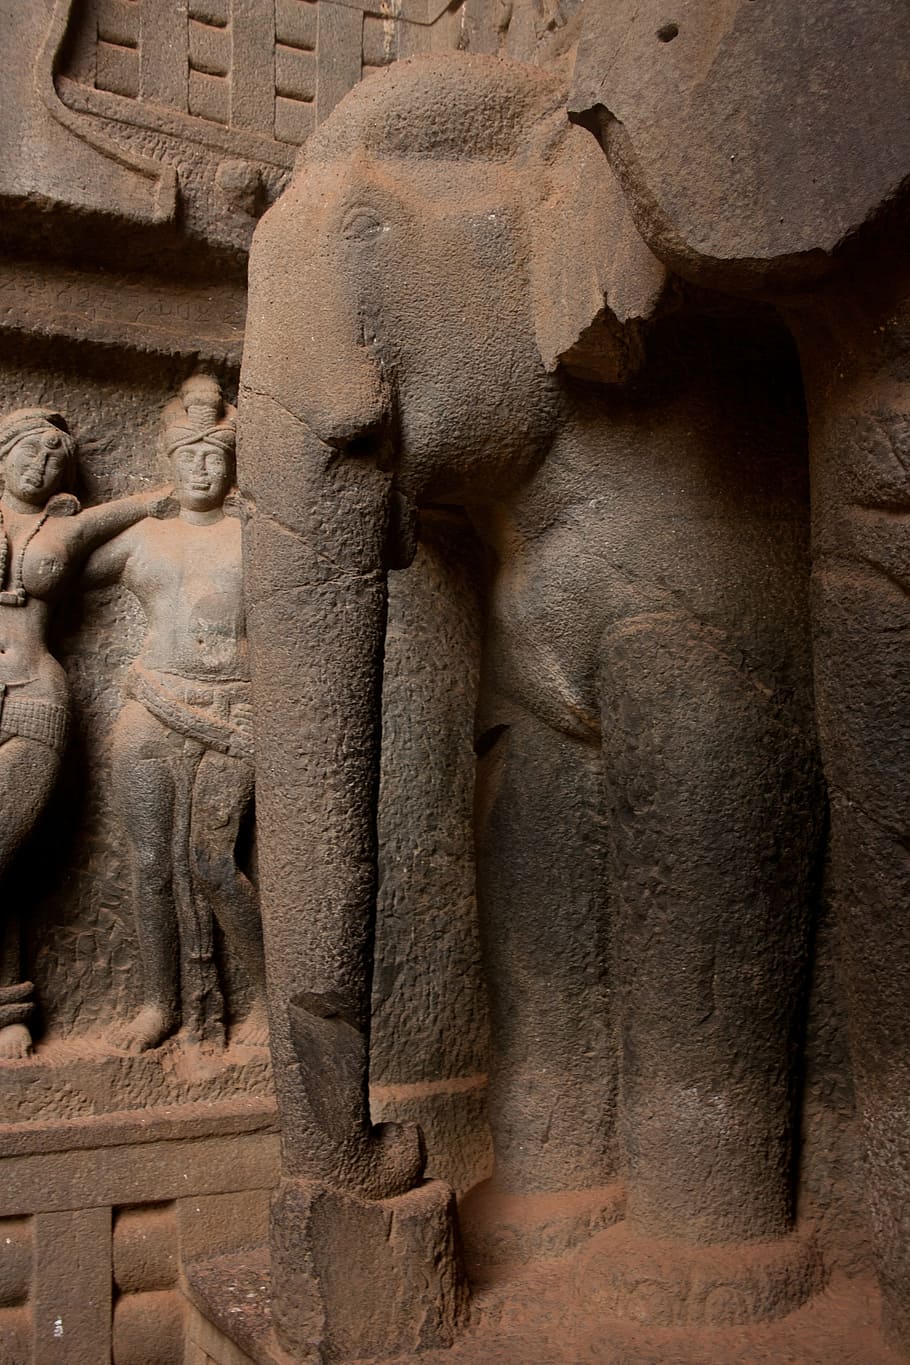 elephant, statue, karla caves, carved stone, india, sculpture, architecture, representation, human representation, craft